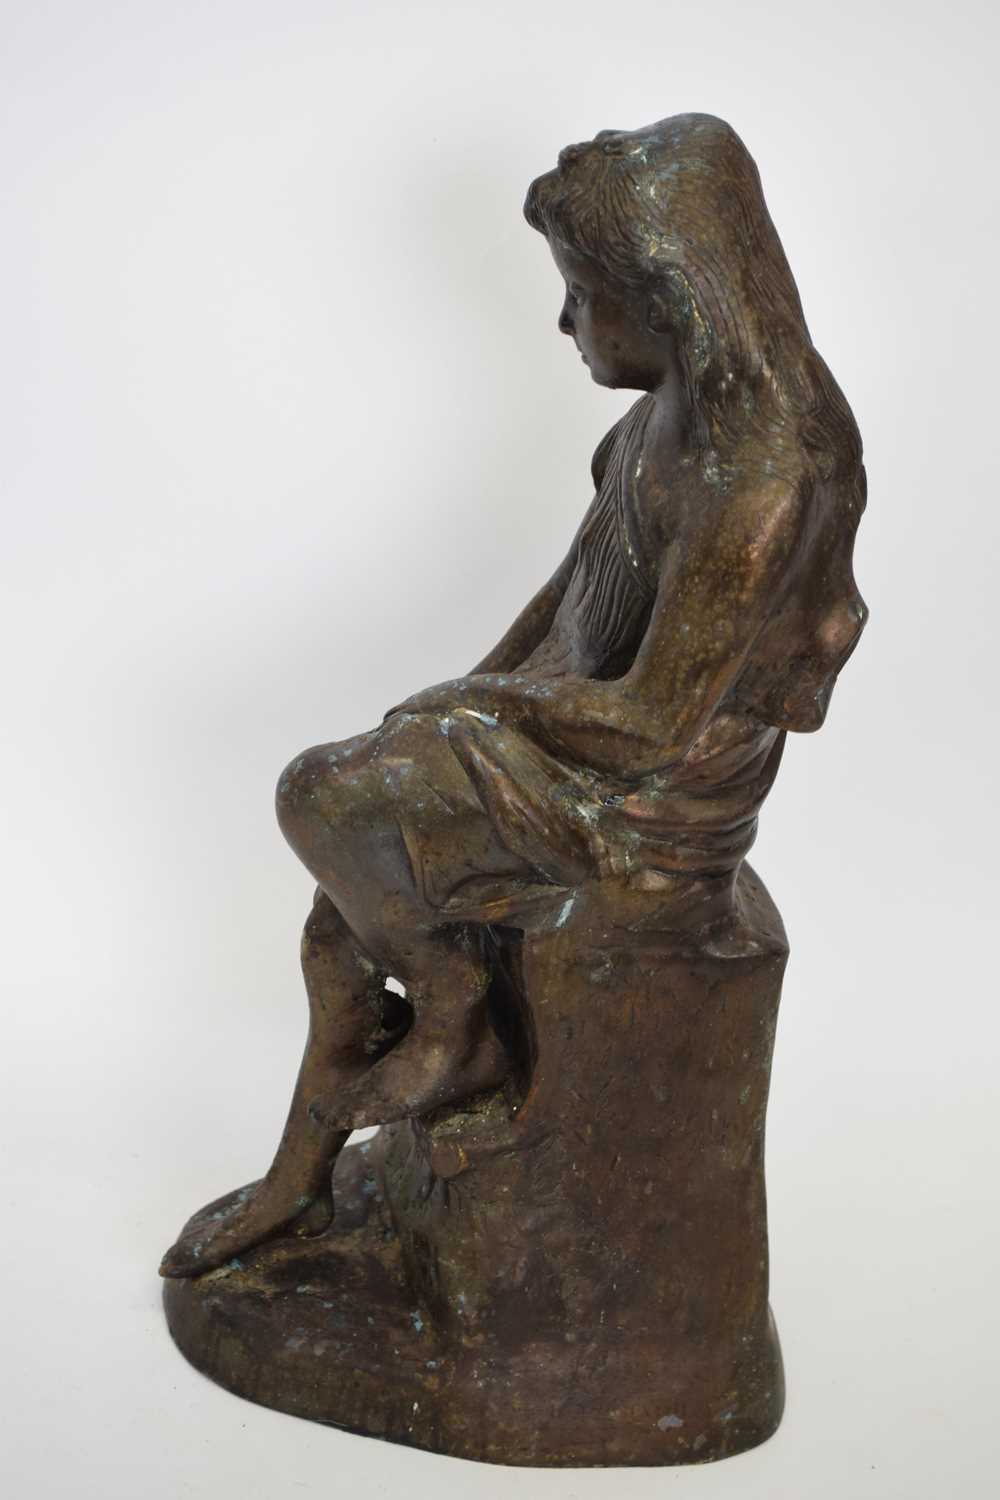 20th century hollow bronzed metal figure of a seated girl, 43cm high - Image 4 of 4